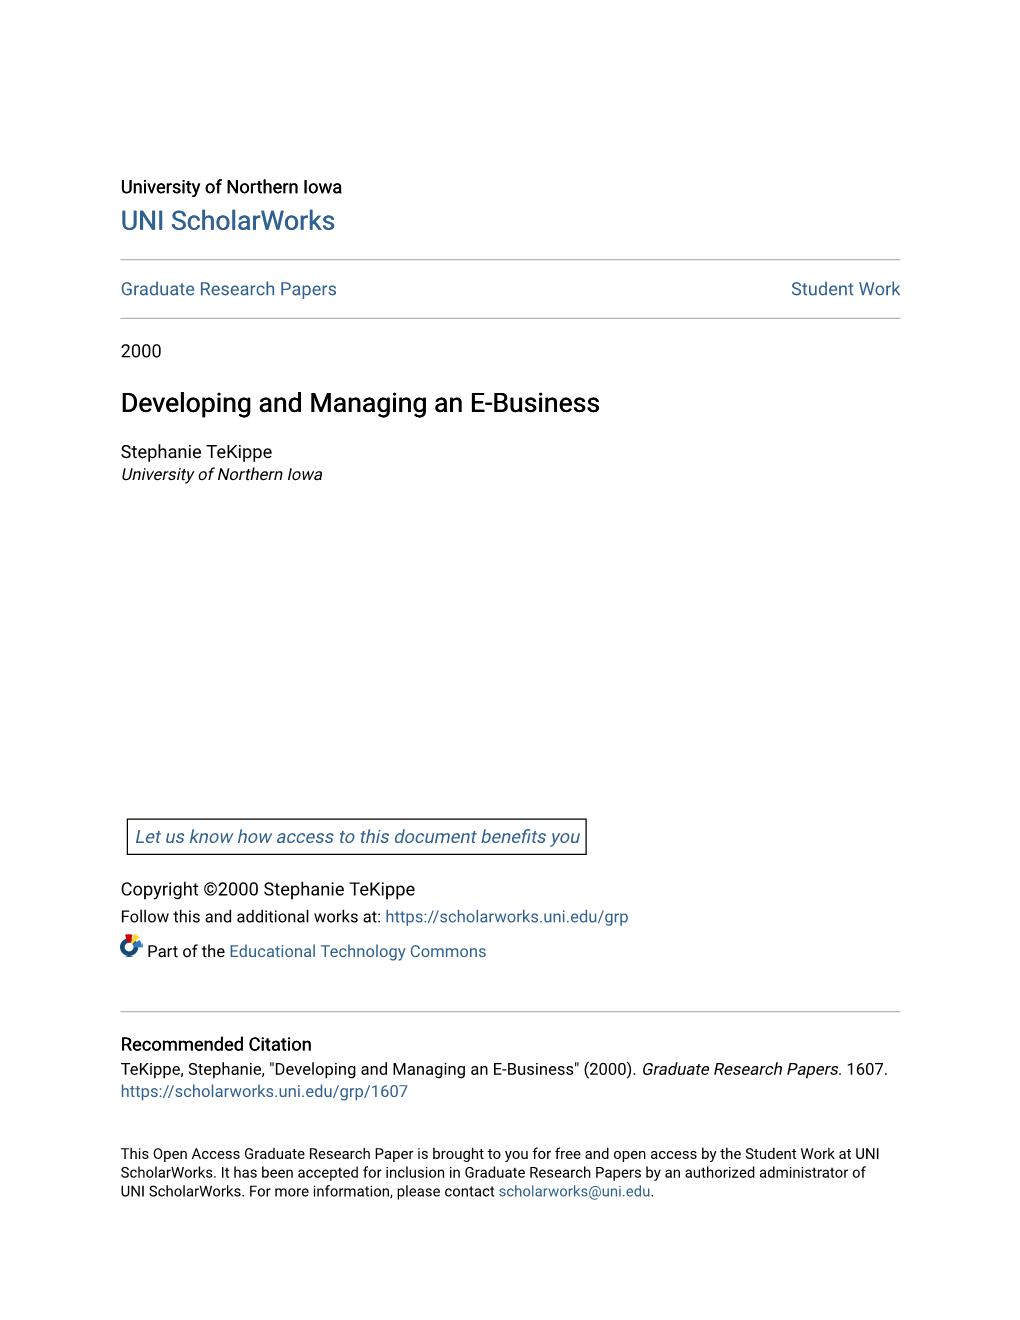 Developing and Managing an E-Business